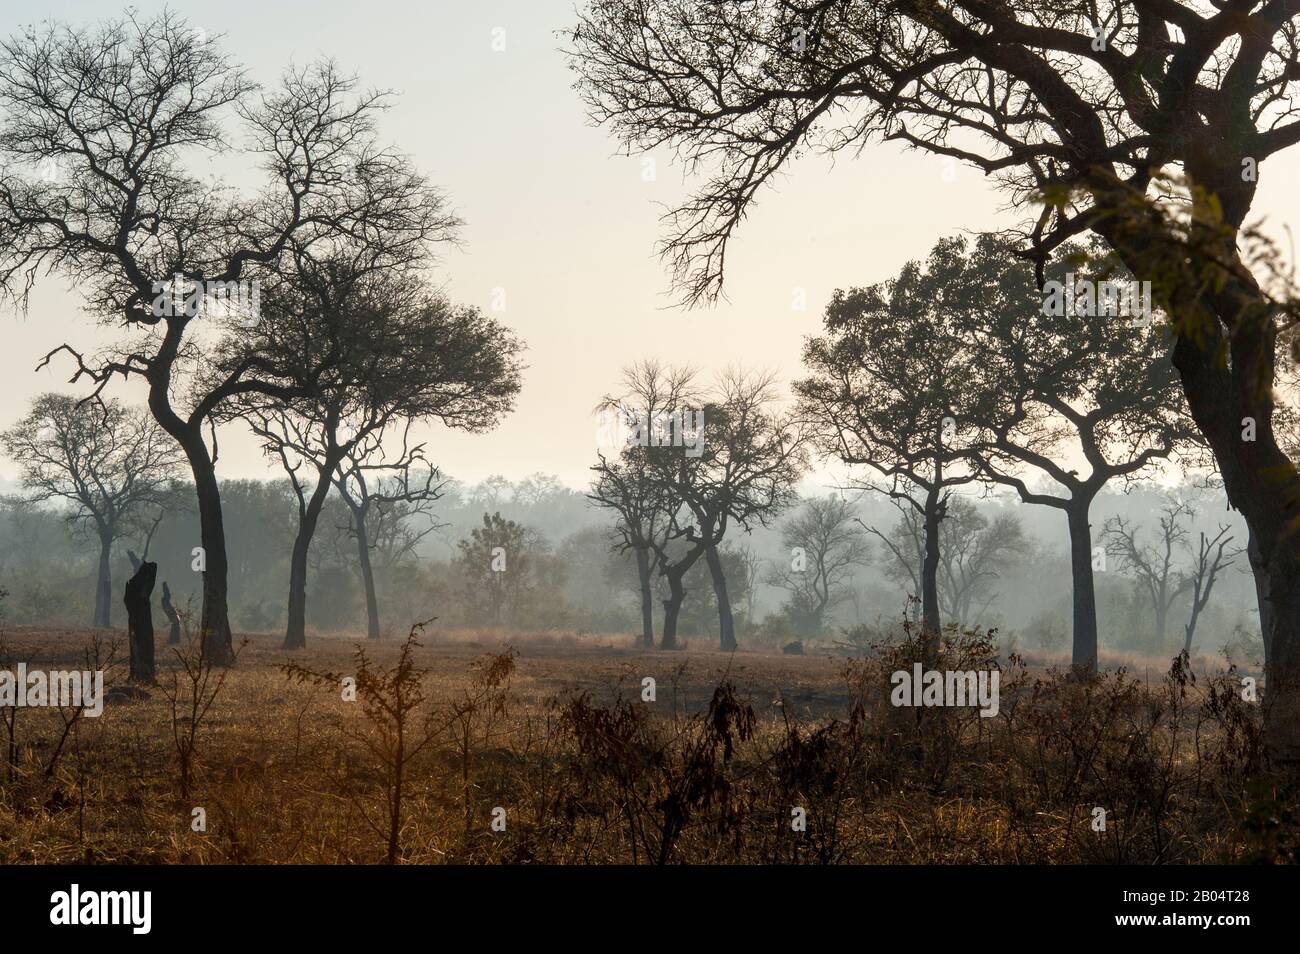 Landscape with trees in the Sabi Sands Game Reserve adjacent to the Kruger National Park in South Africa. Stock Photo